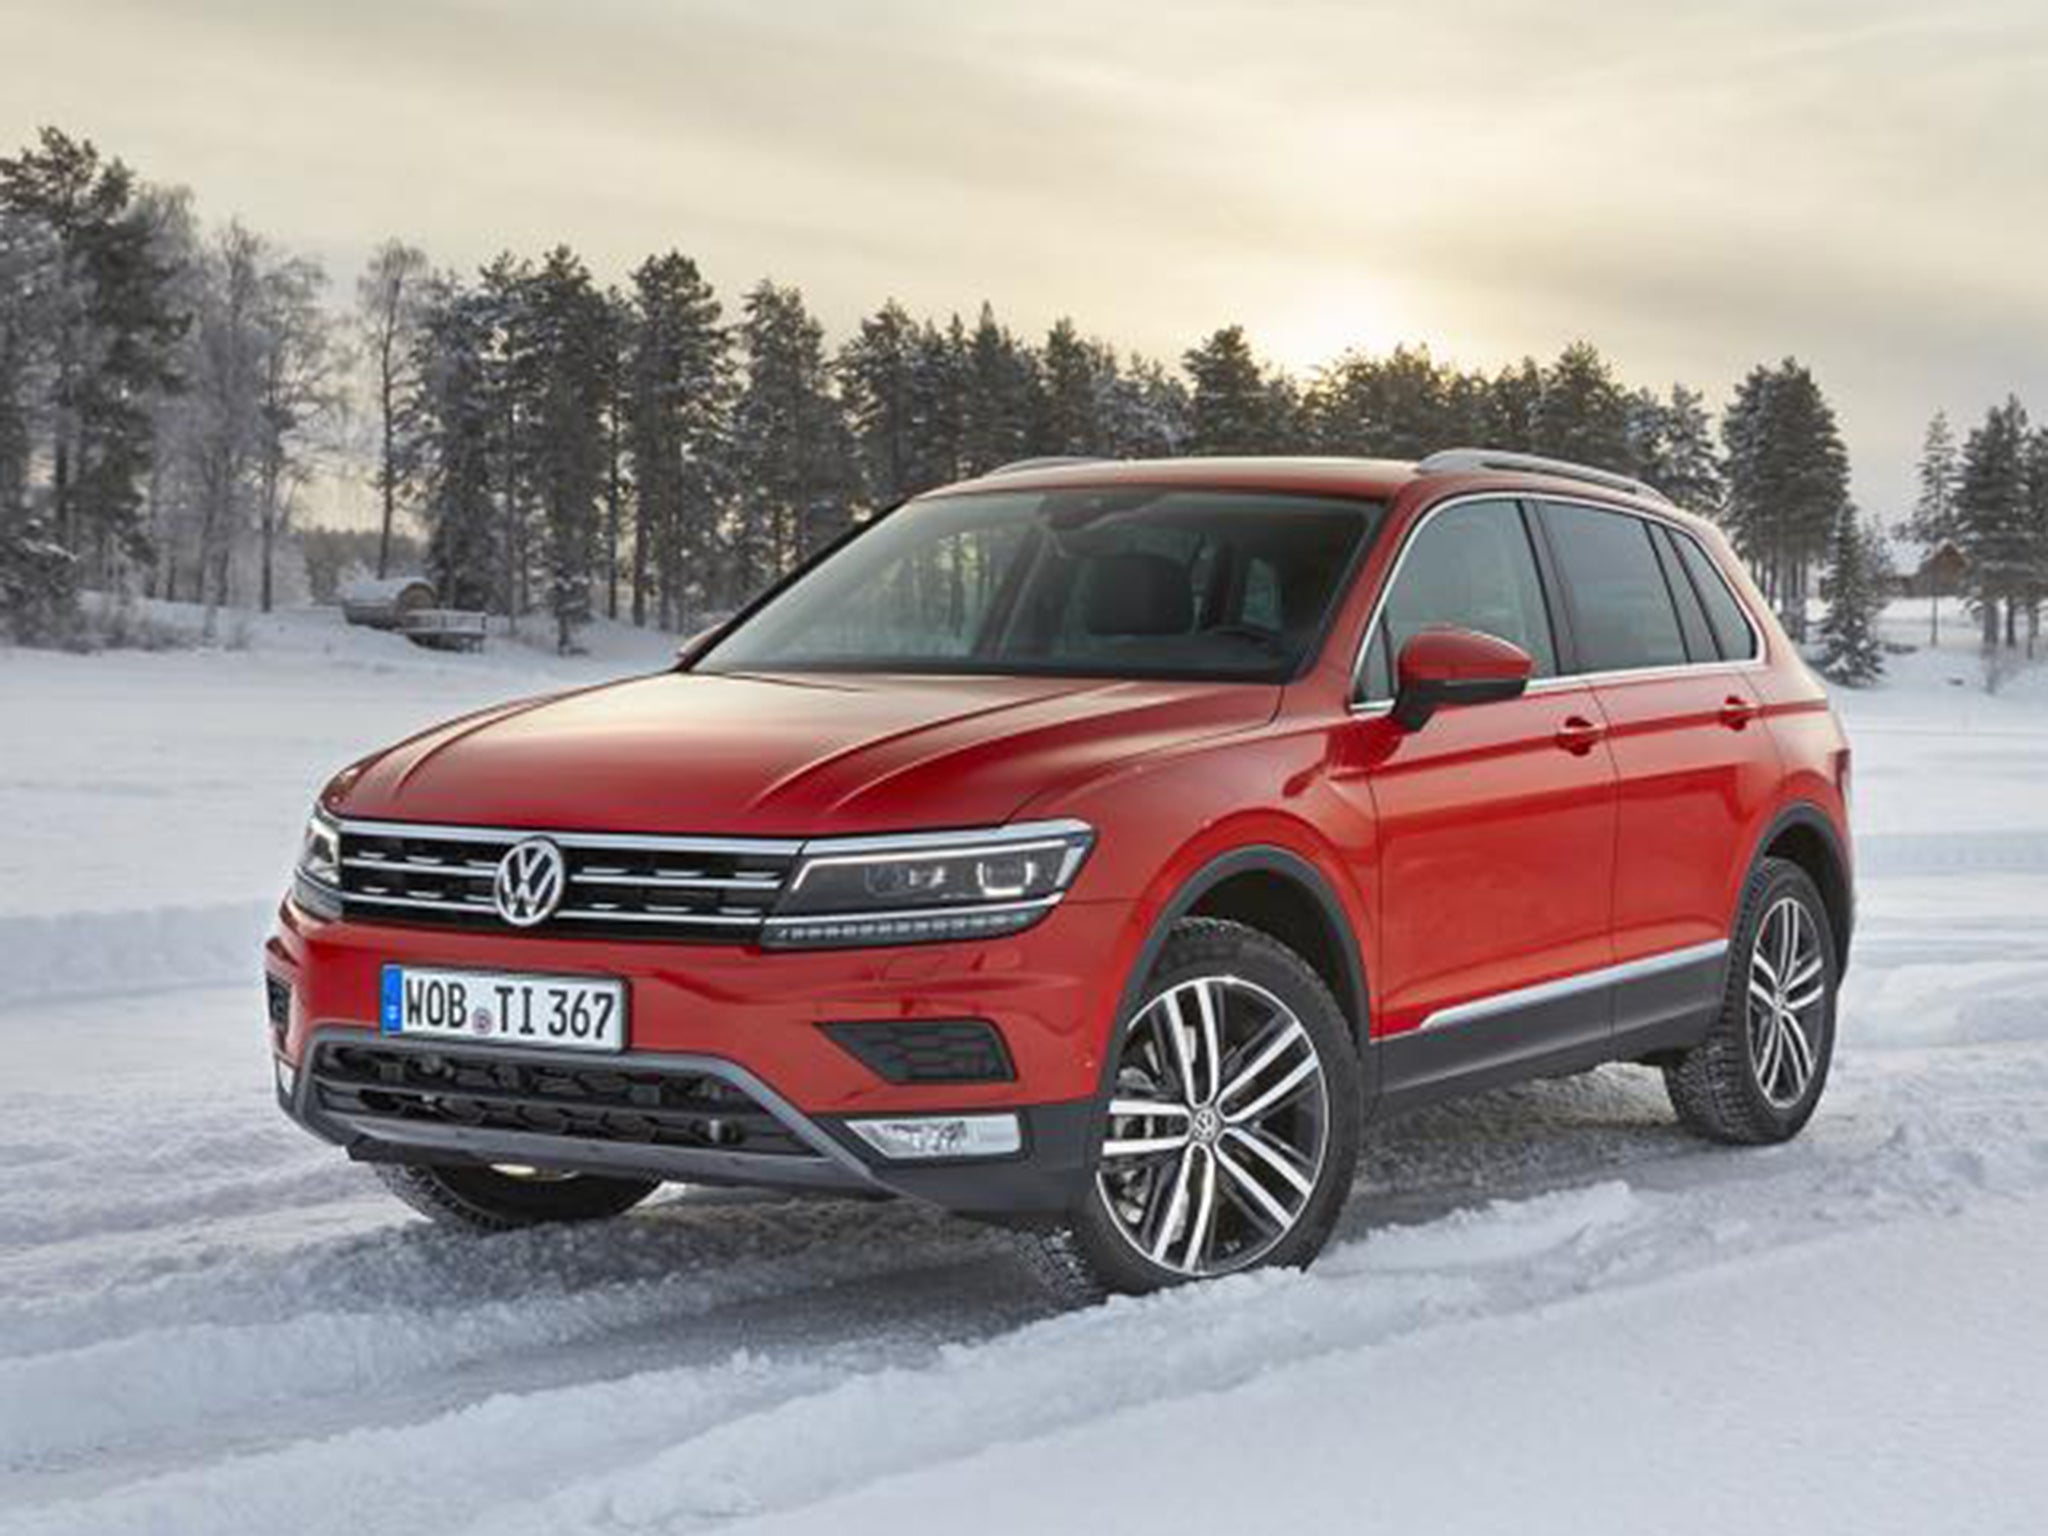 VW seems to have made the Tiguan a far more accomplished SUV than it already was